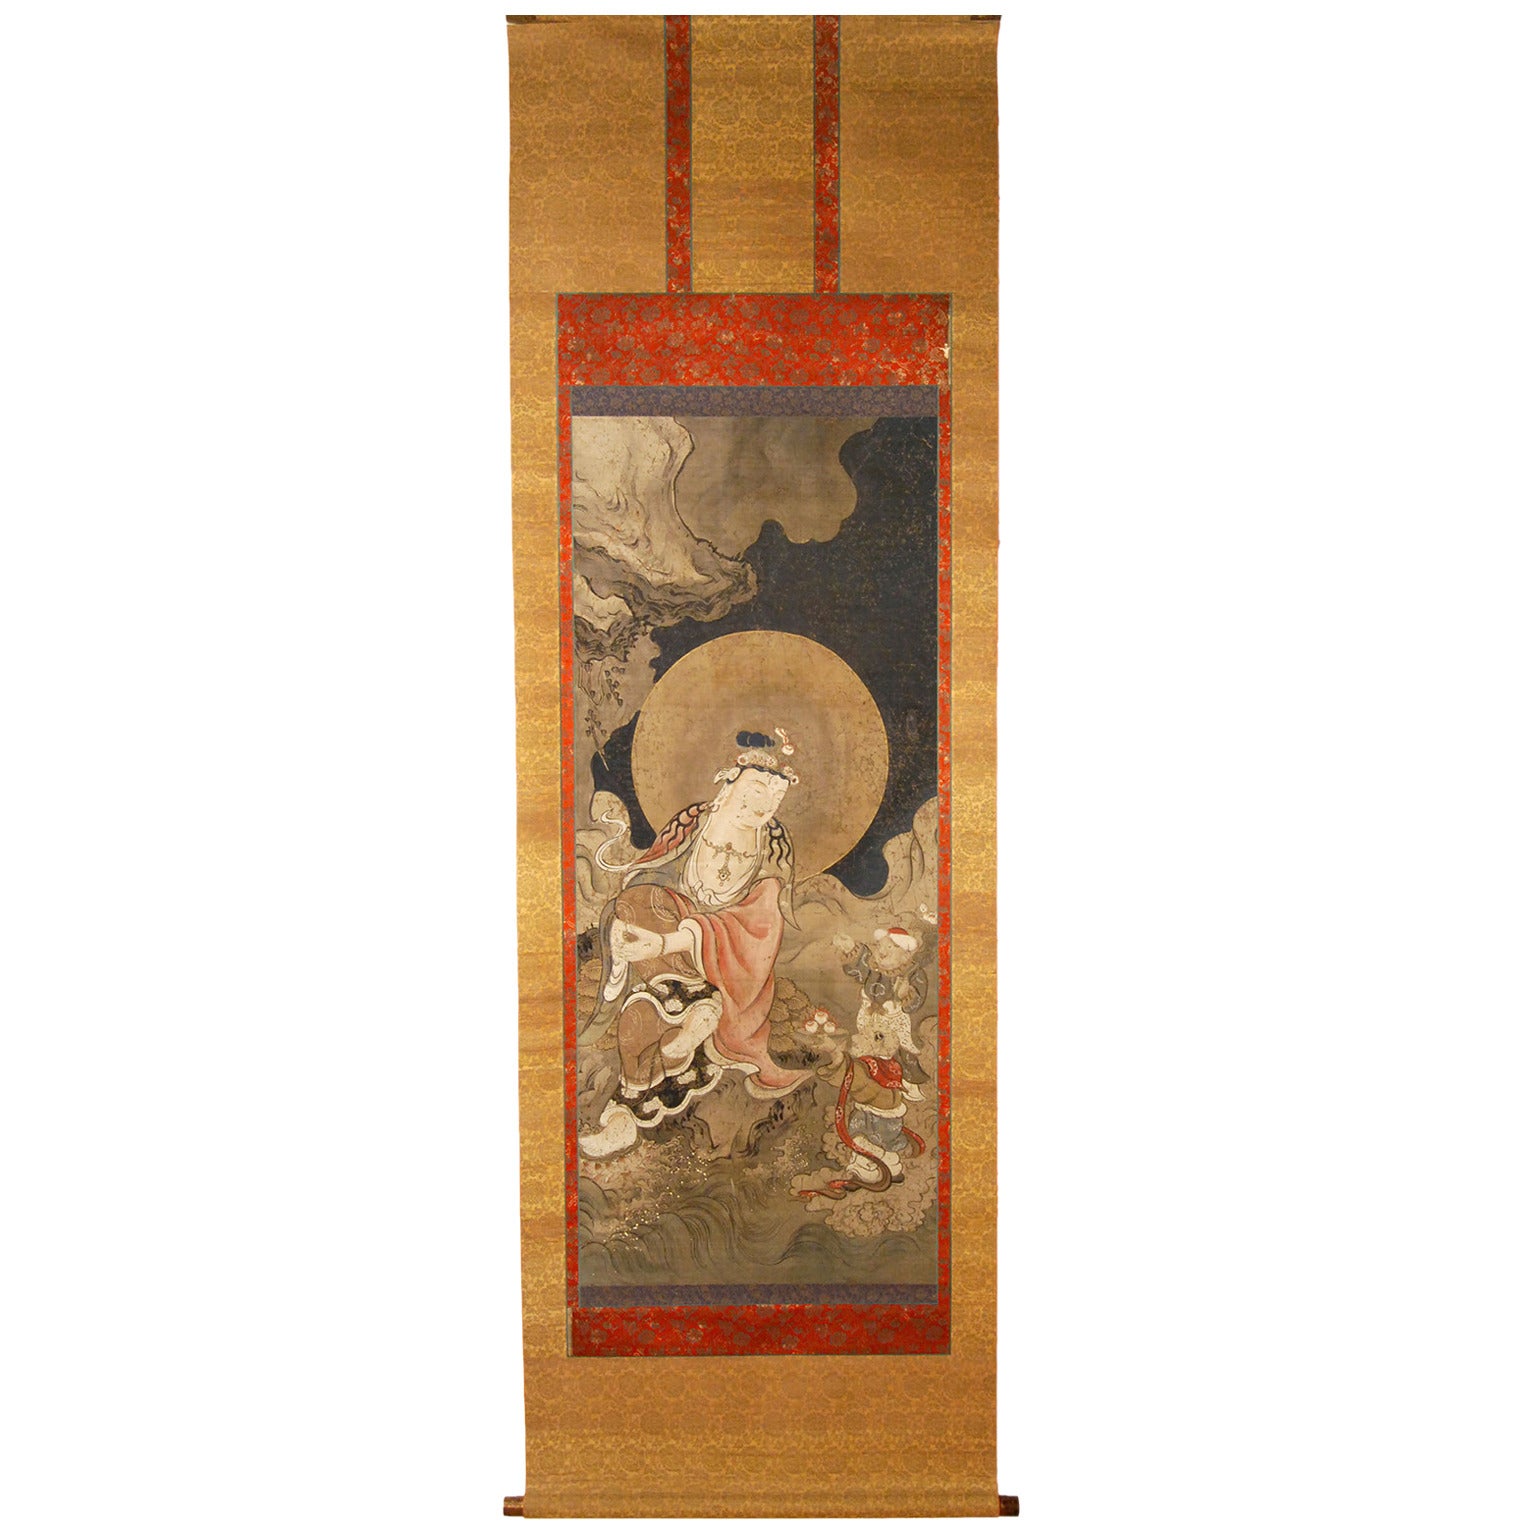 18th Century Japanese Buddhist Scroll Painting of Guanyin in Celestial Setting